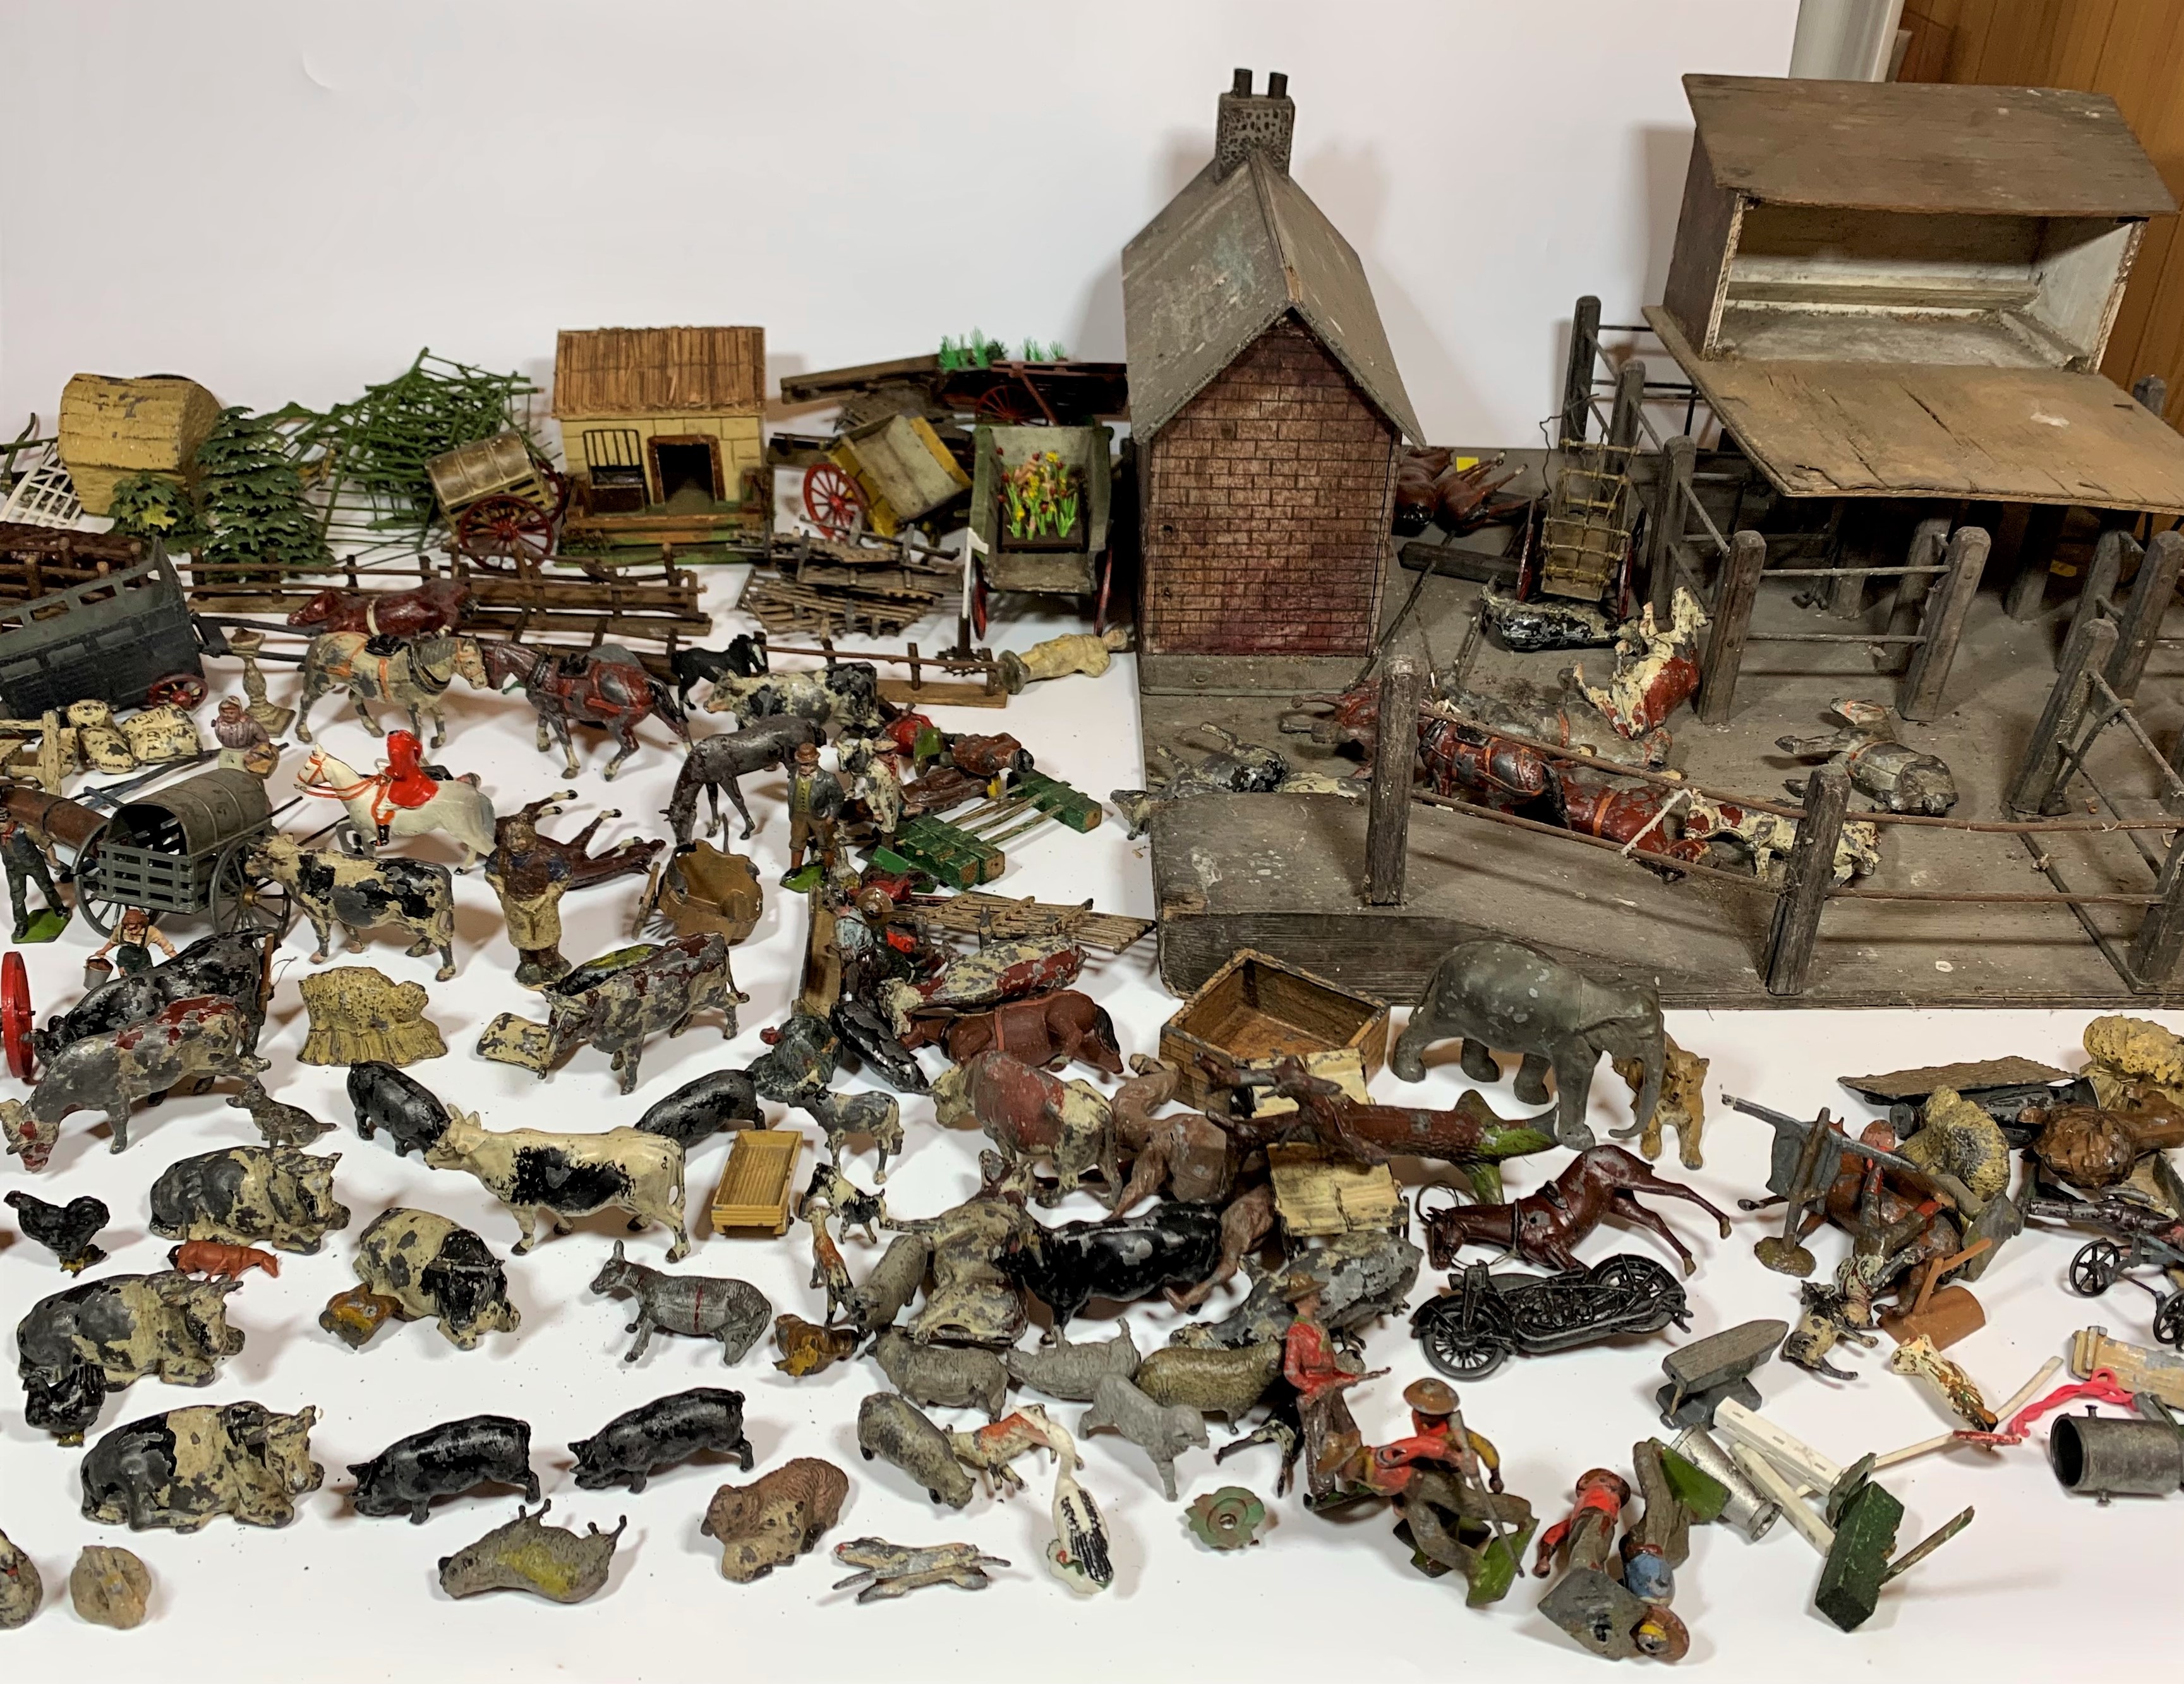 Wooden farmyard with buildings, accessories and animals. Farmyard measures 21” x 20” (possibly